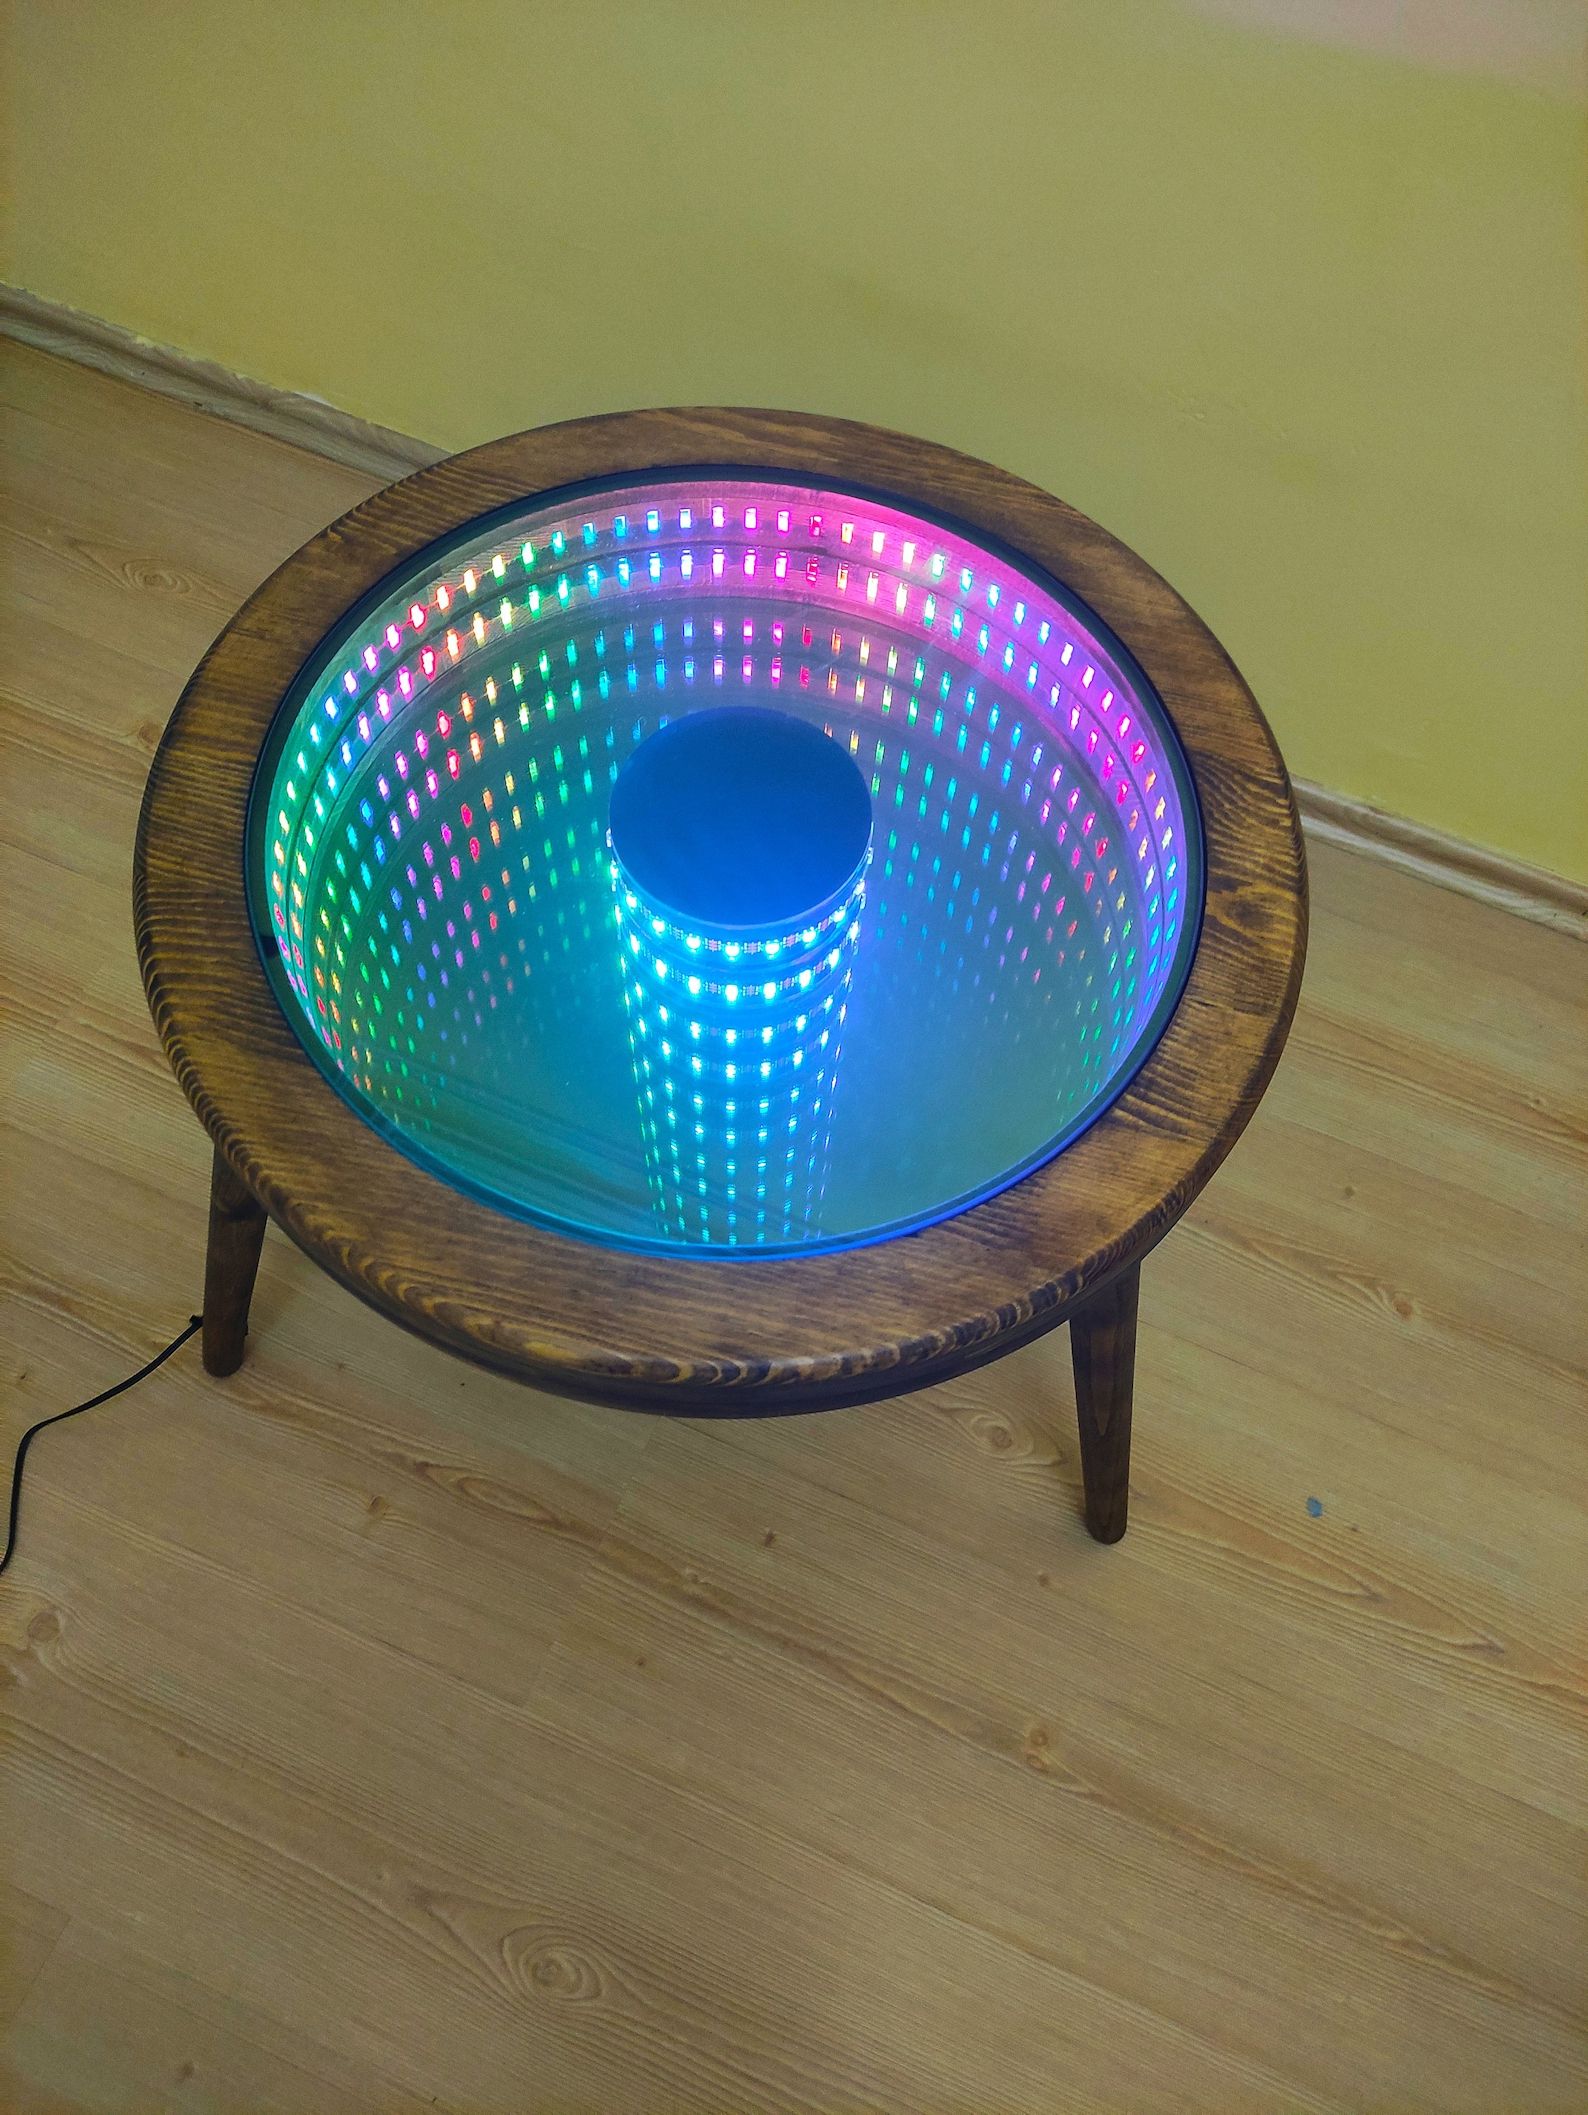 İnfinity Mirror Coffee Table Led Light Table Wooden Coffee | Etsy Within Coffee Tables With Led Lights (View 17 of 20)